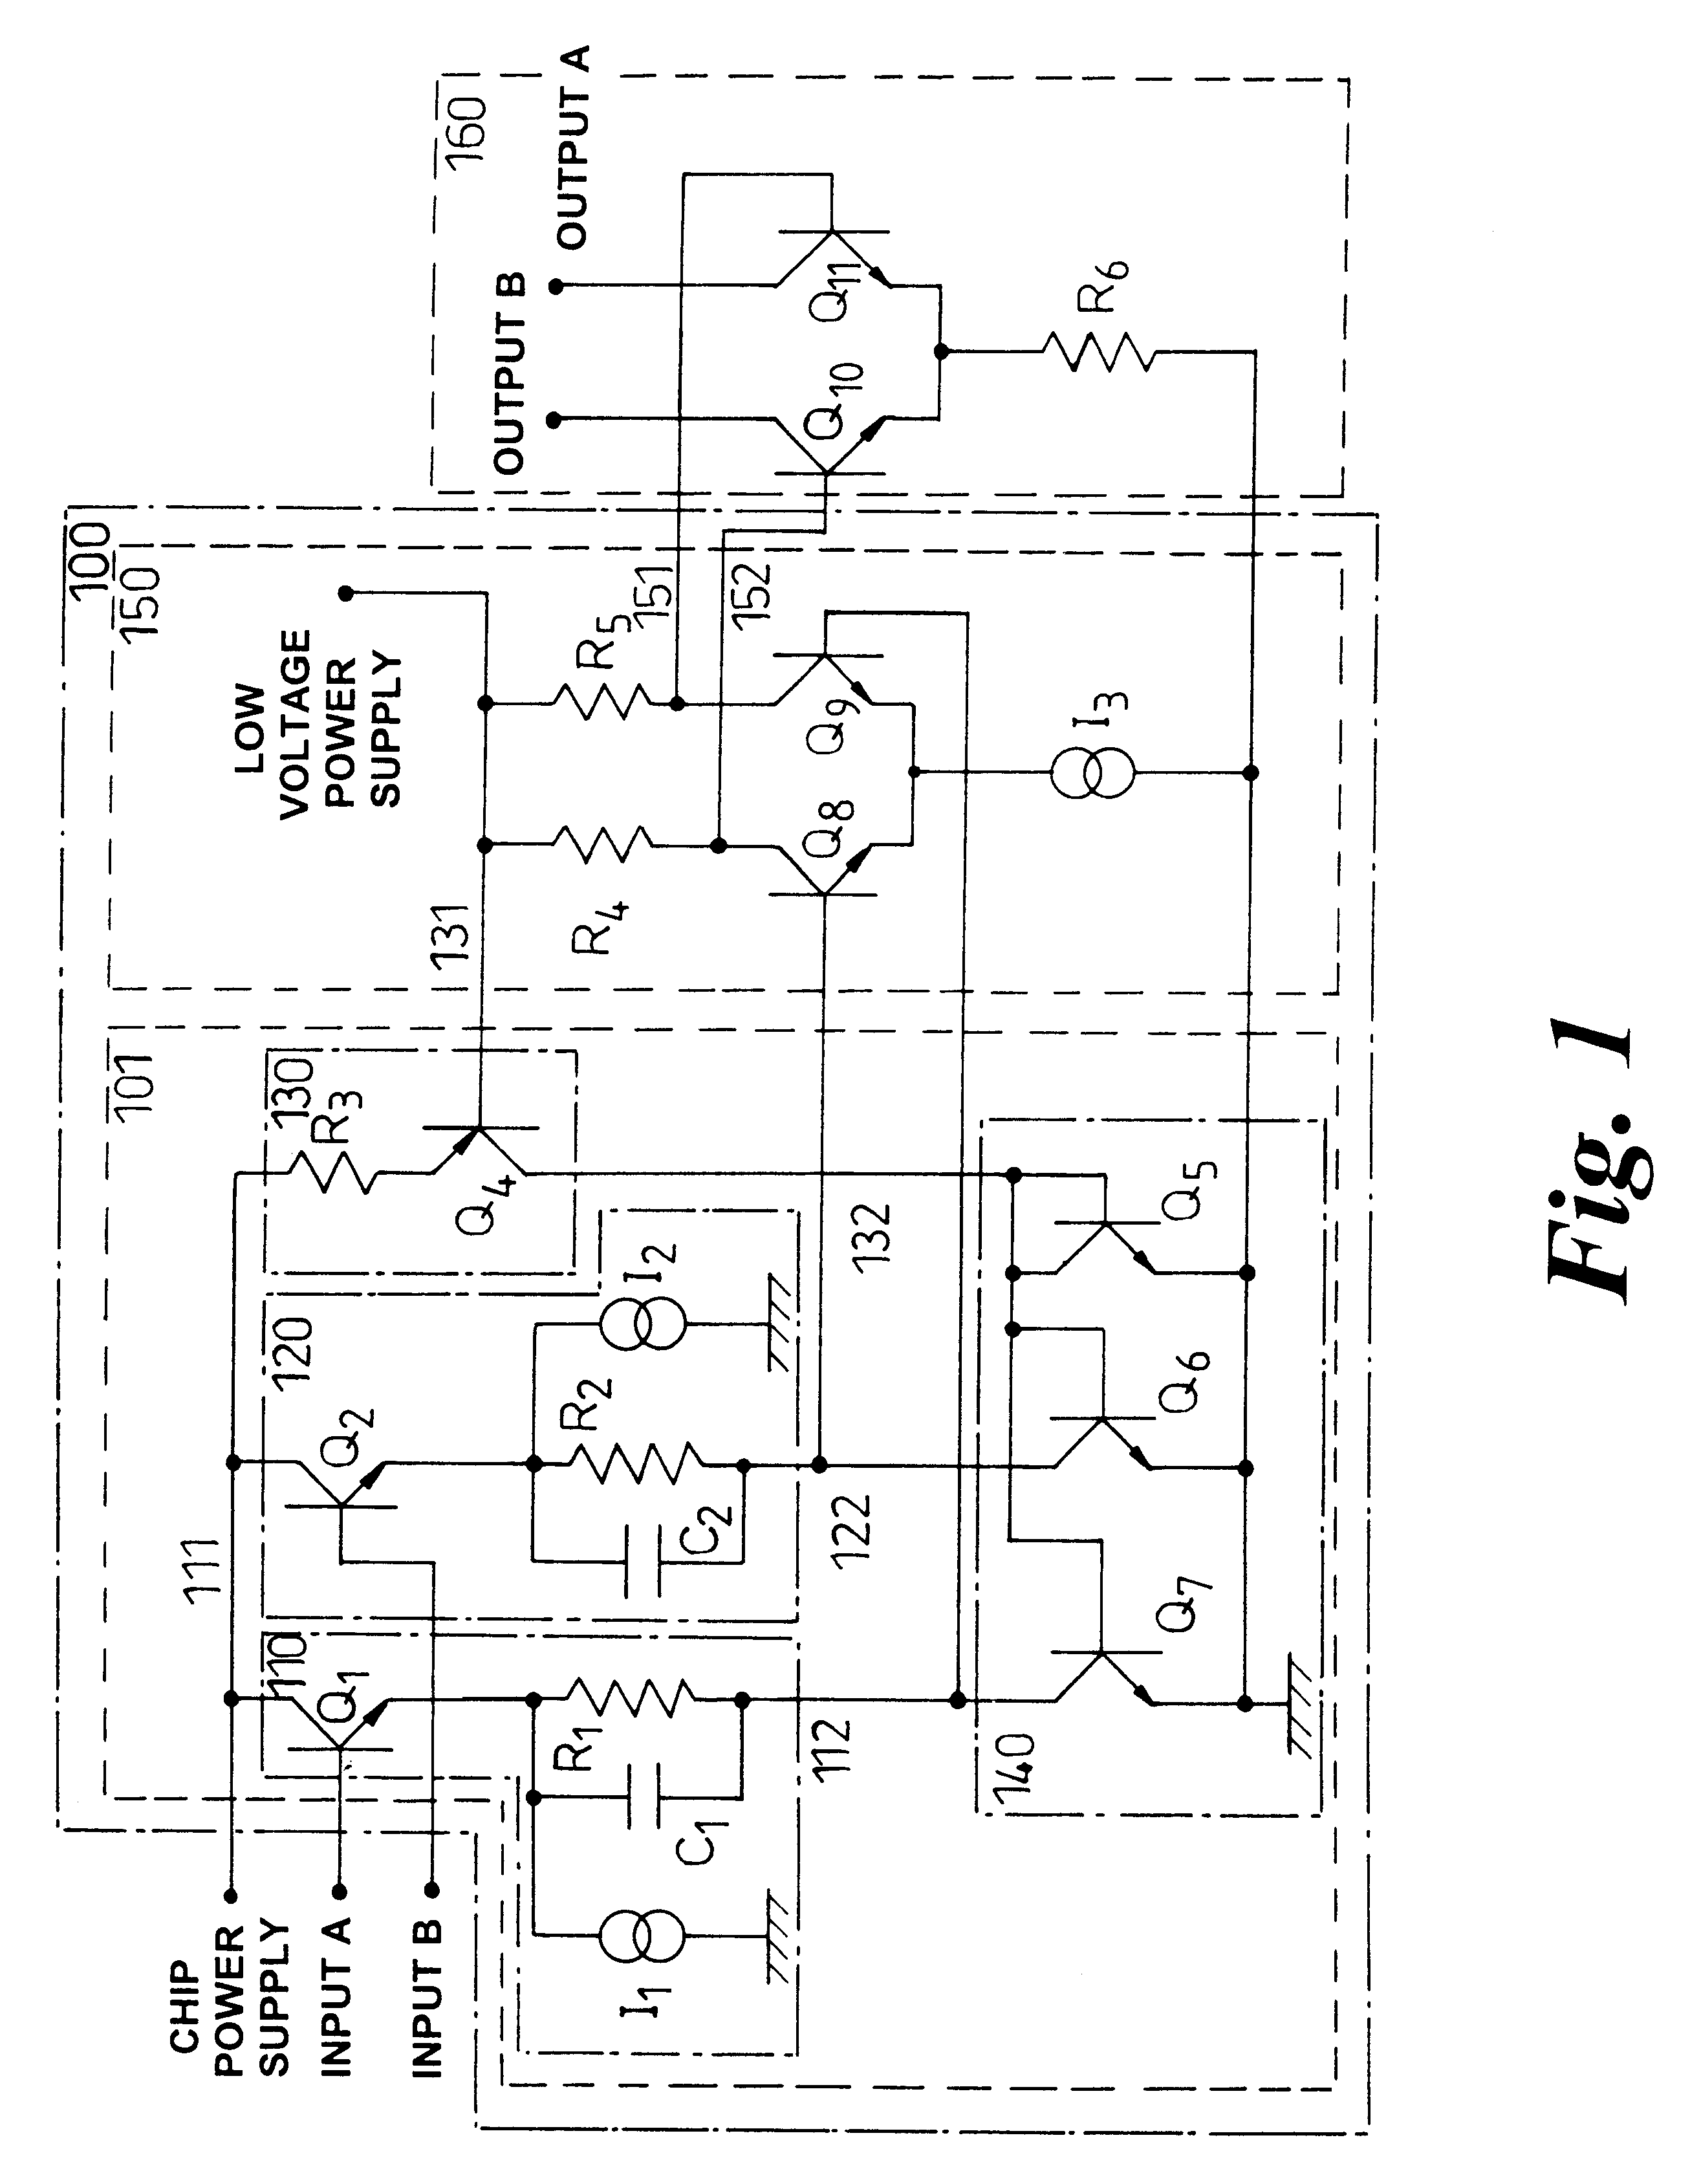 High speed level shift circuit for low voltage output